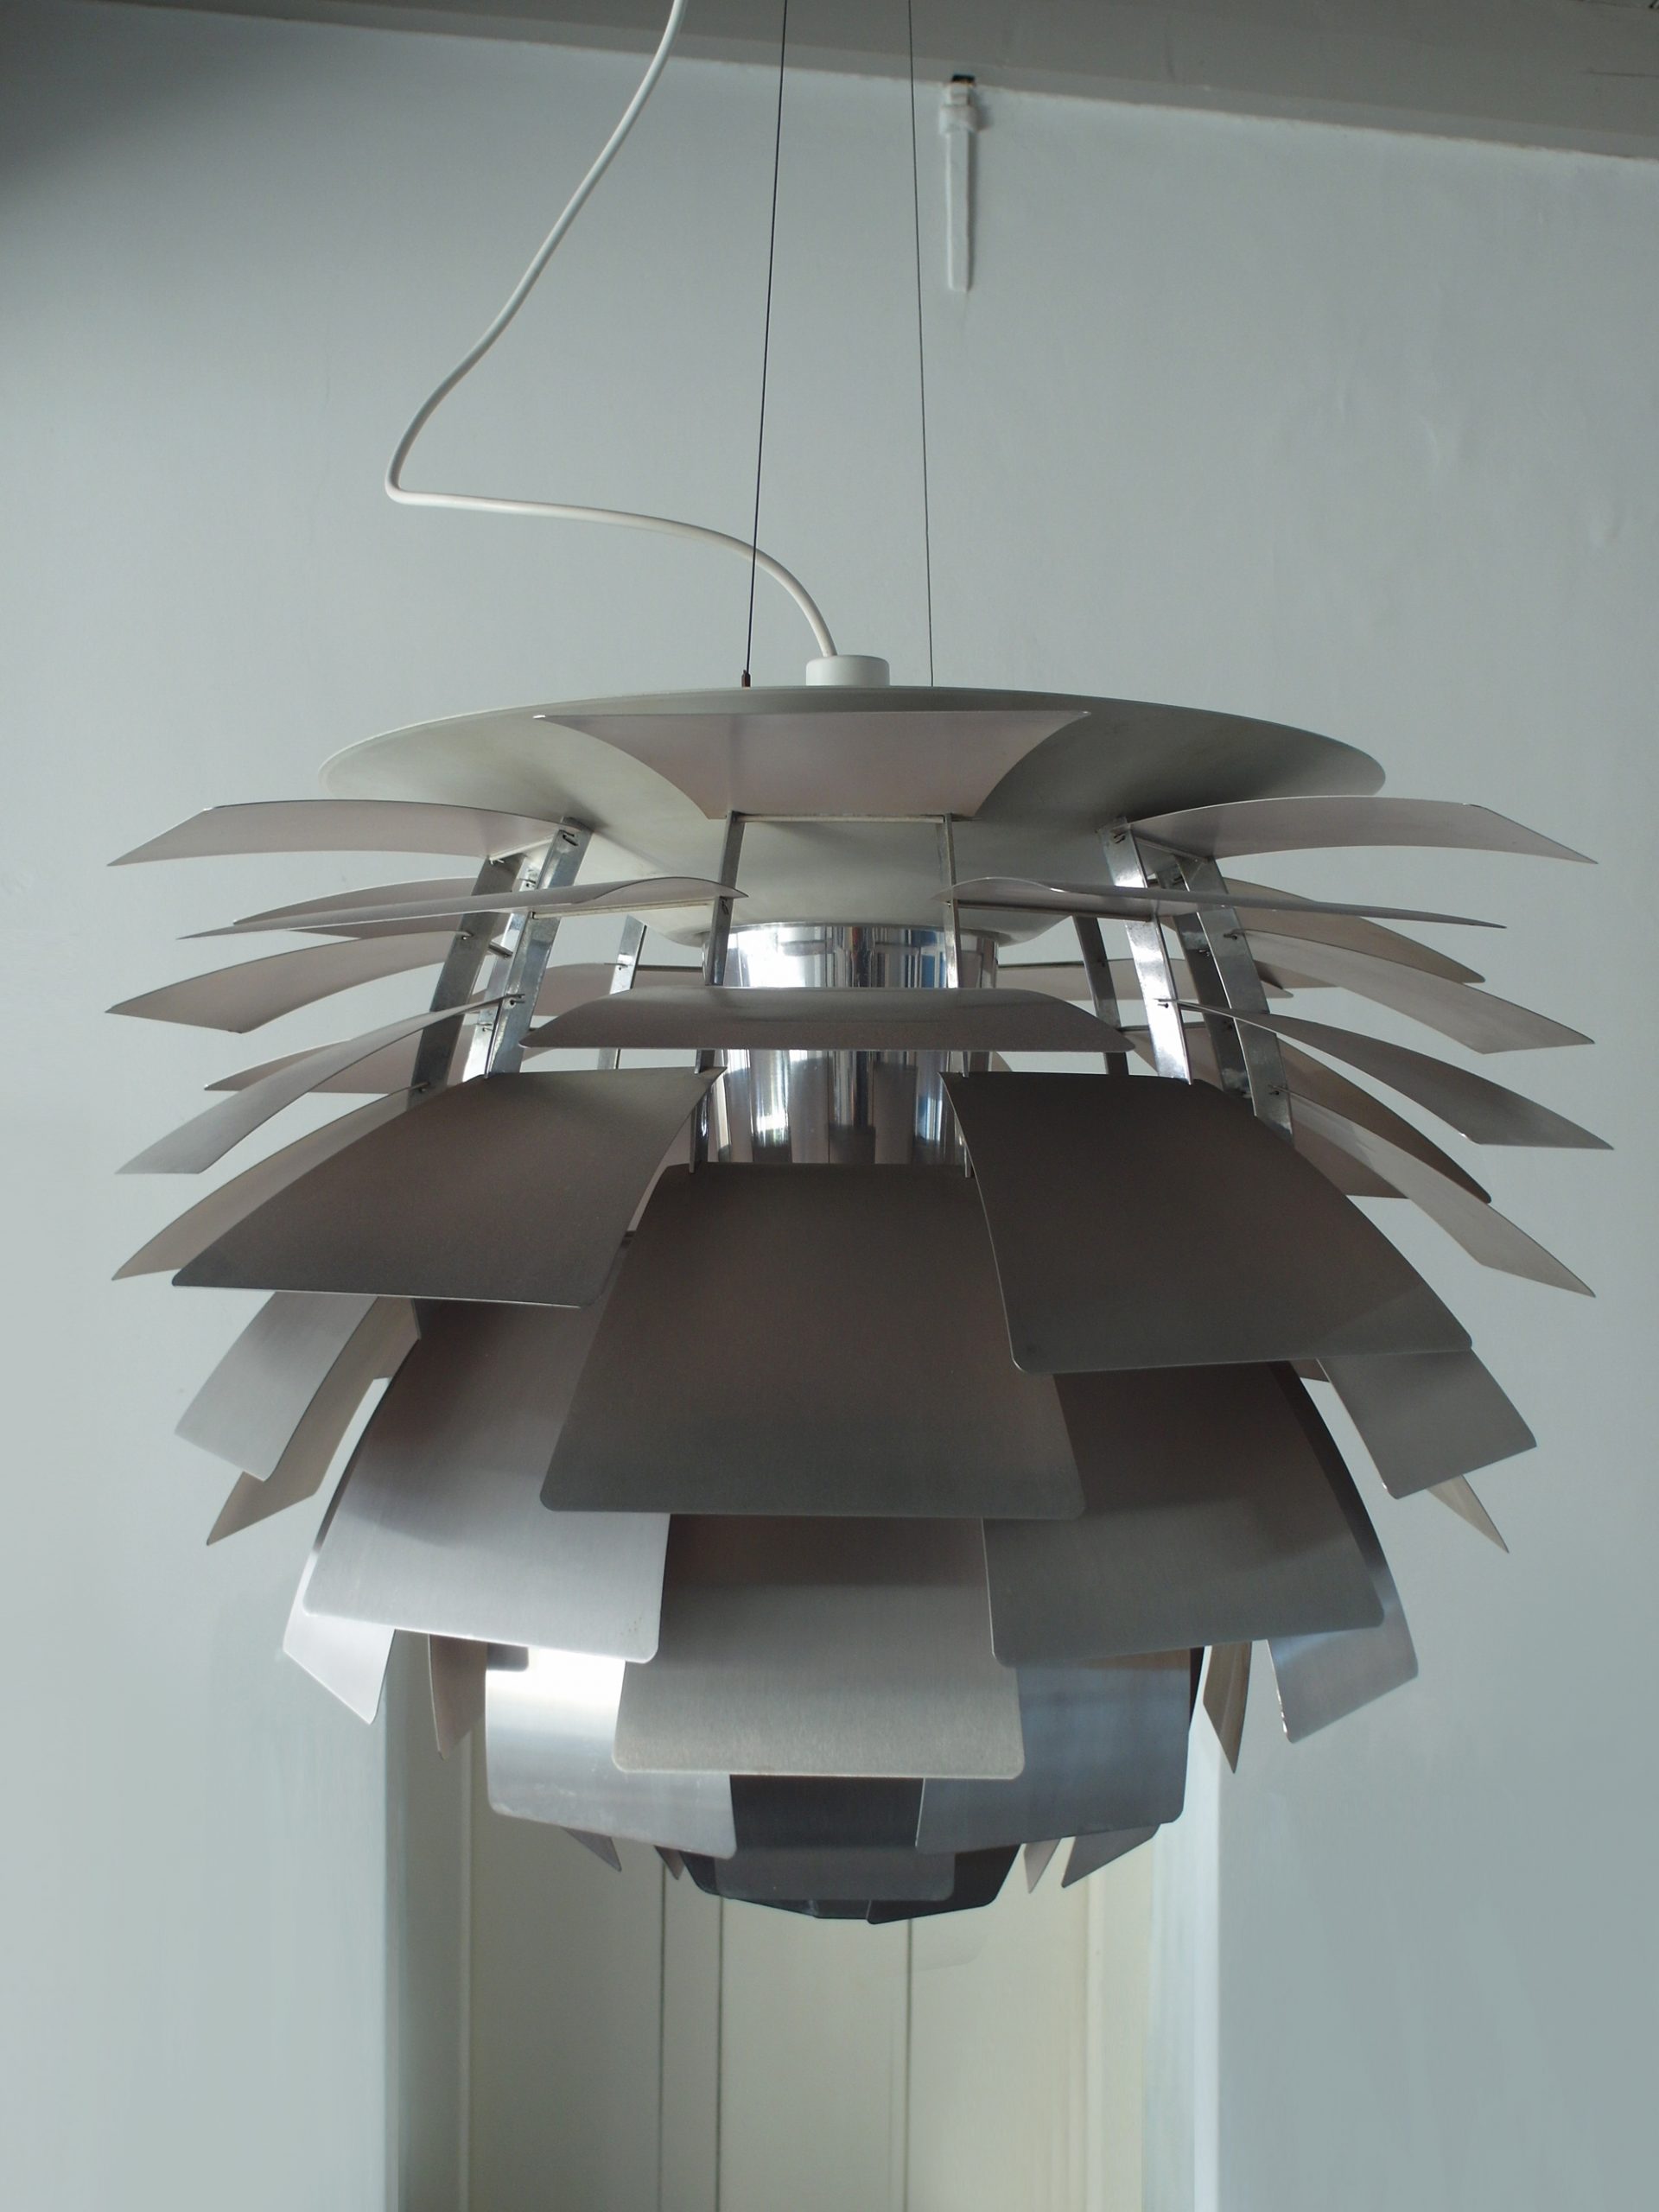 Light Years Ahead : The Story Of The Ph Lamp Louis Poulsen